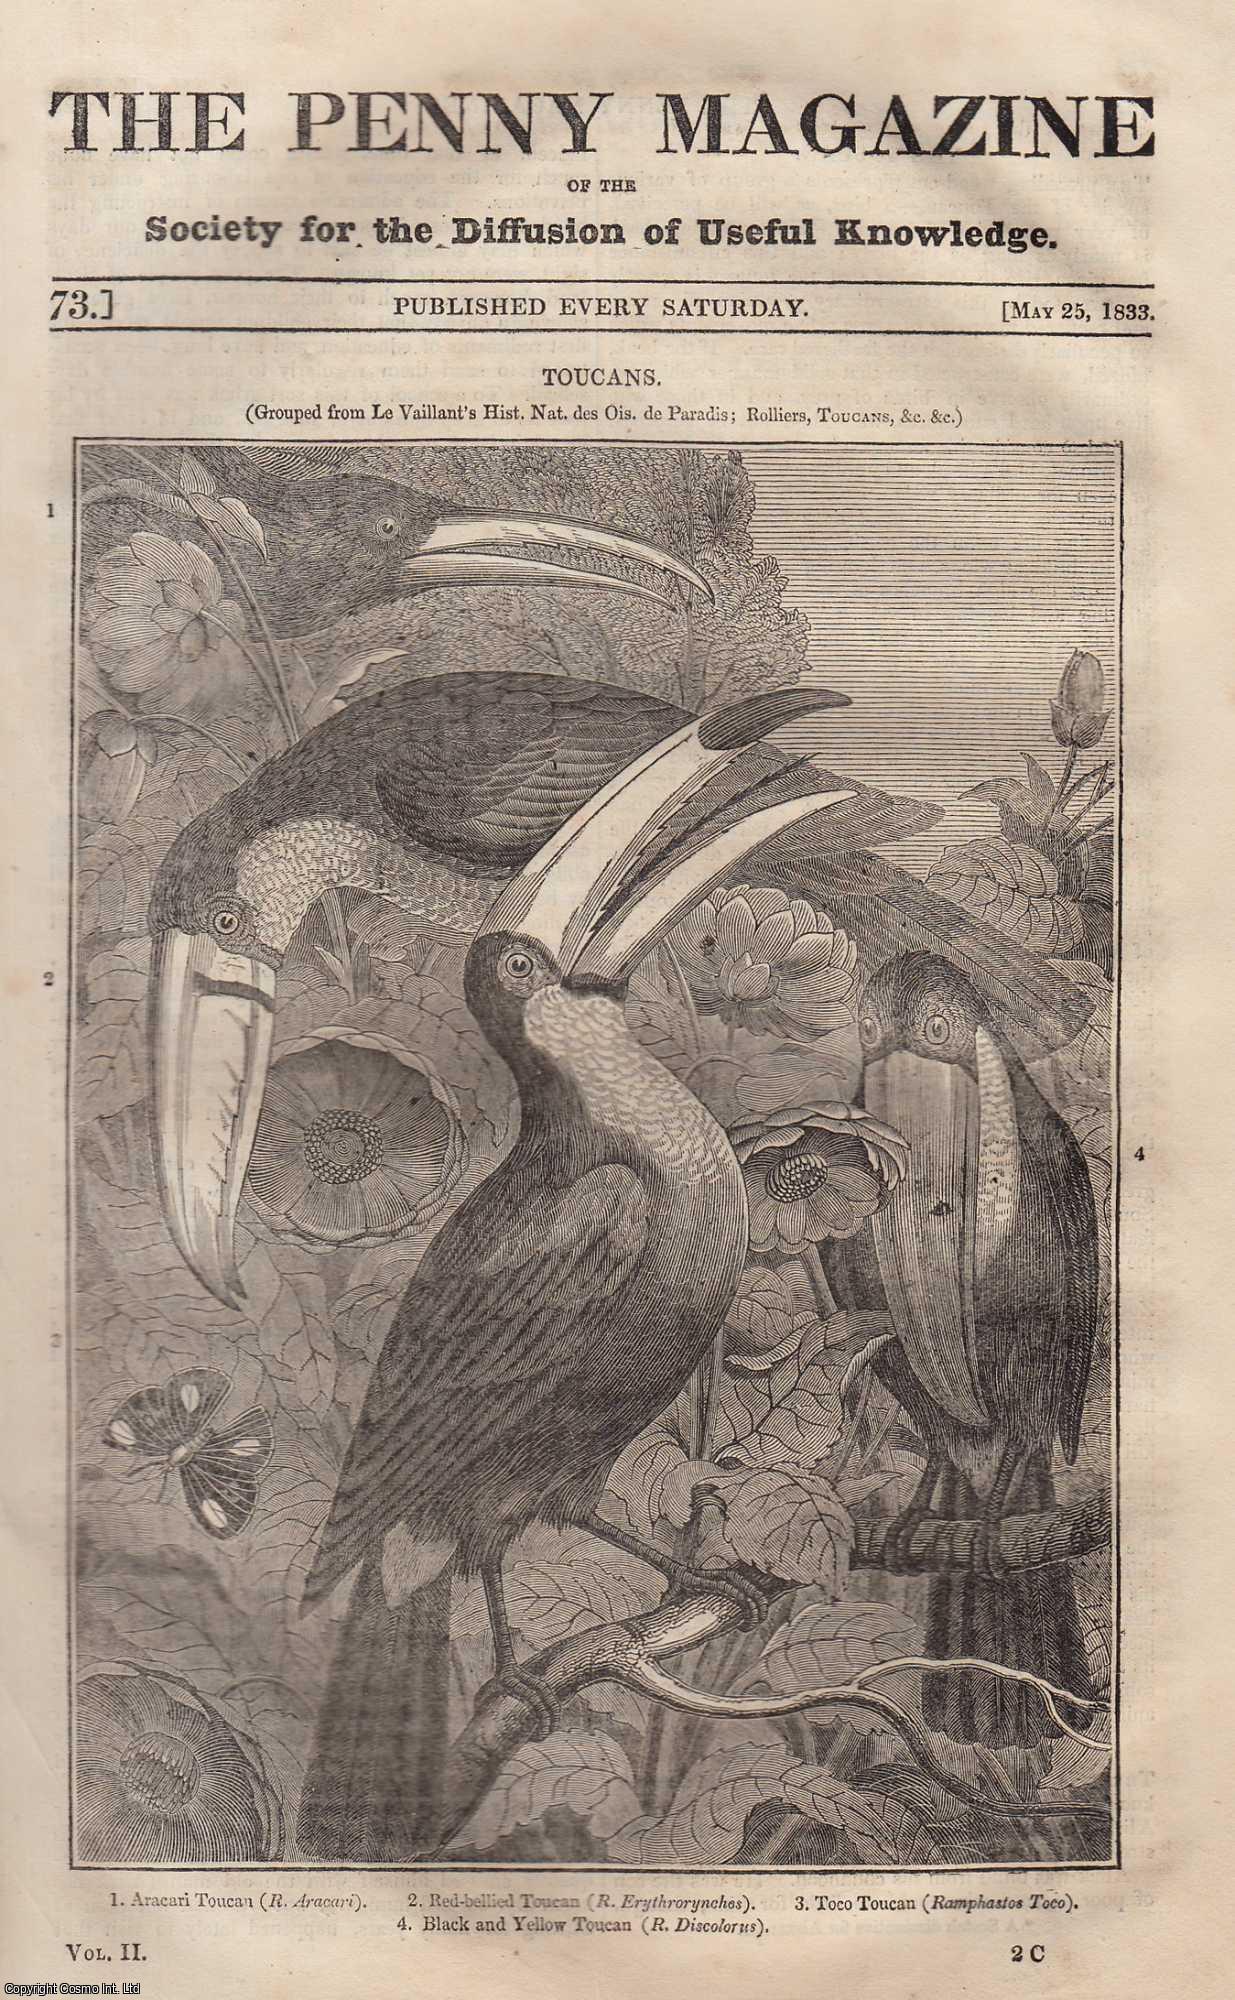 Penny Magazine - Toucans: Aracari, Red-Bellied, Black & Yellow & Toco; Durham Cathedral; The Italian Wolf-Dog, etc. Issue No. 73, May 25th, 1833. A complete original weekly issue of the Penny Magazine, 1833.